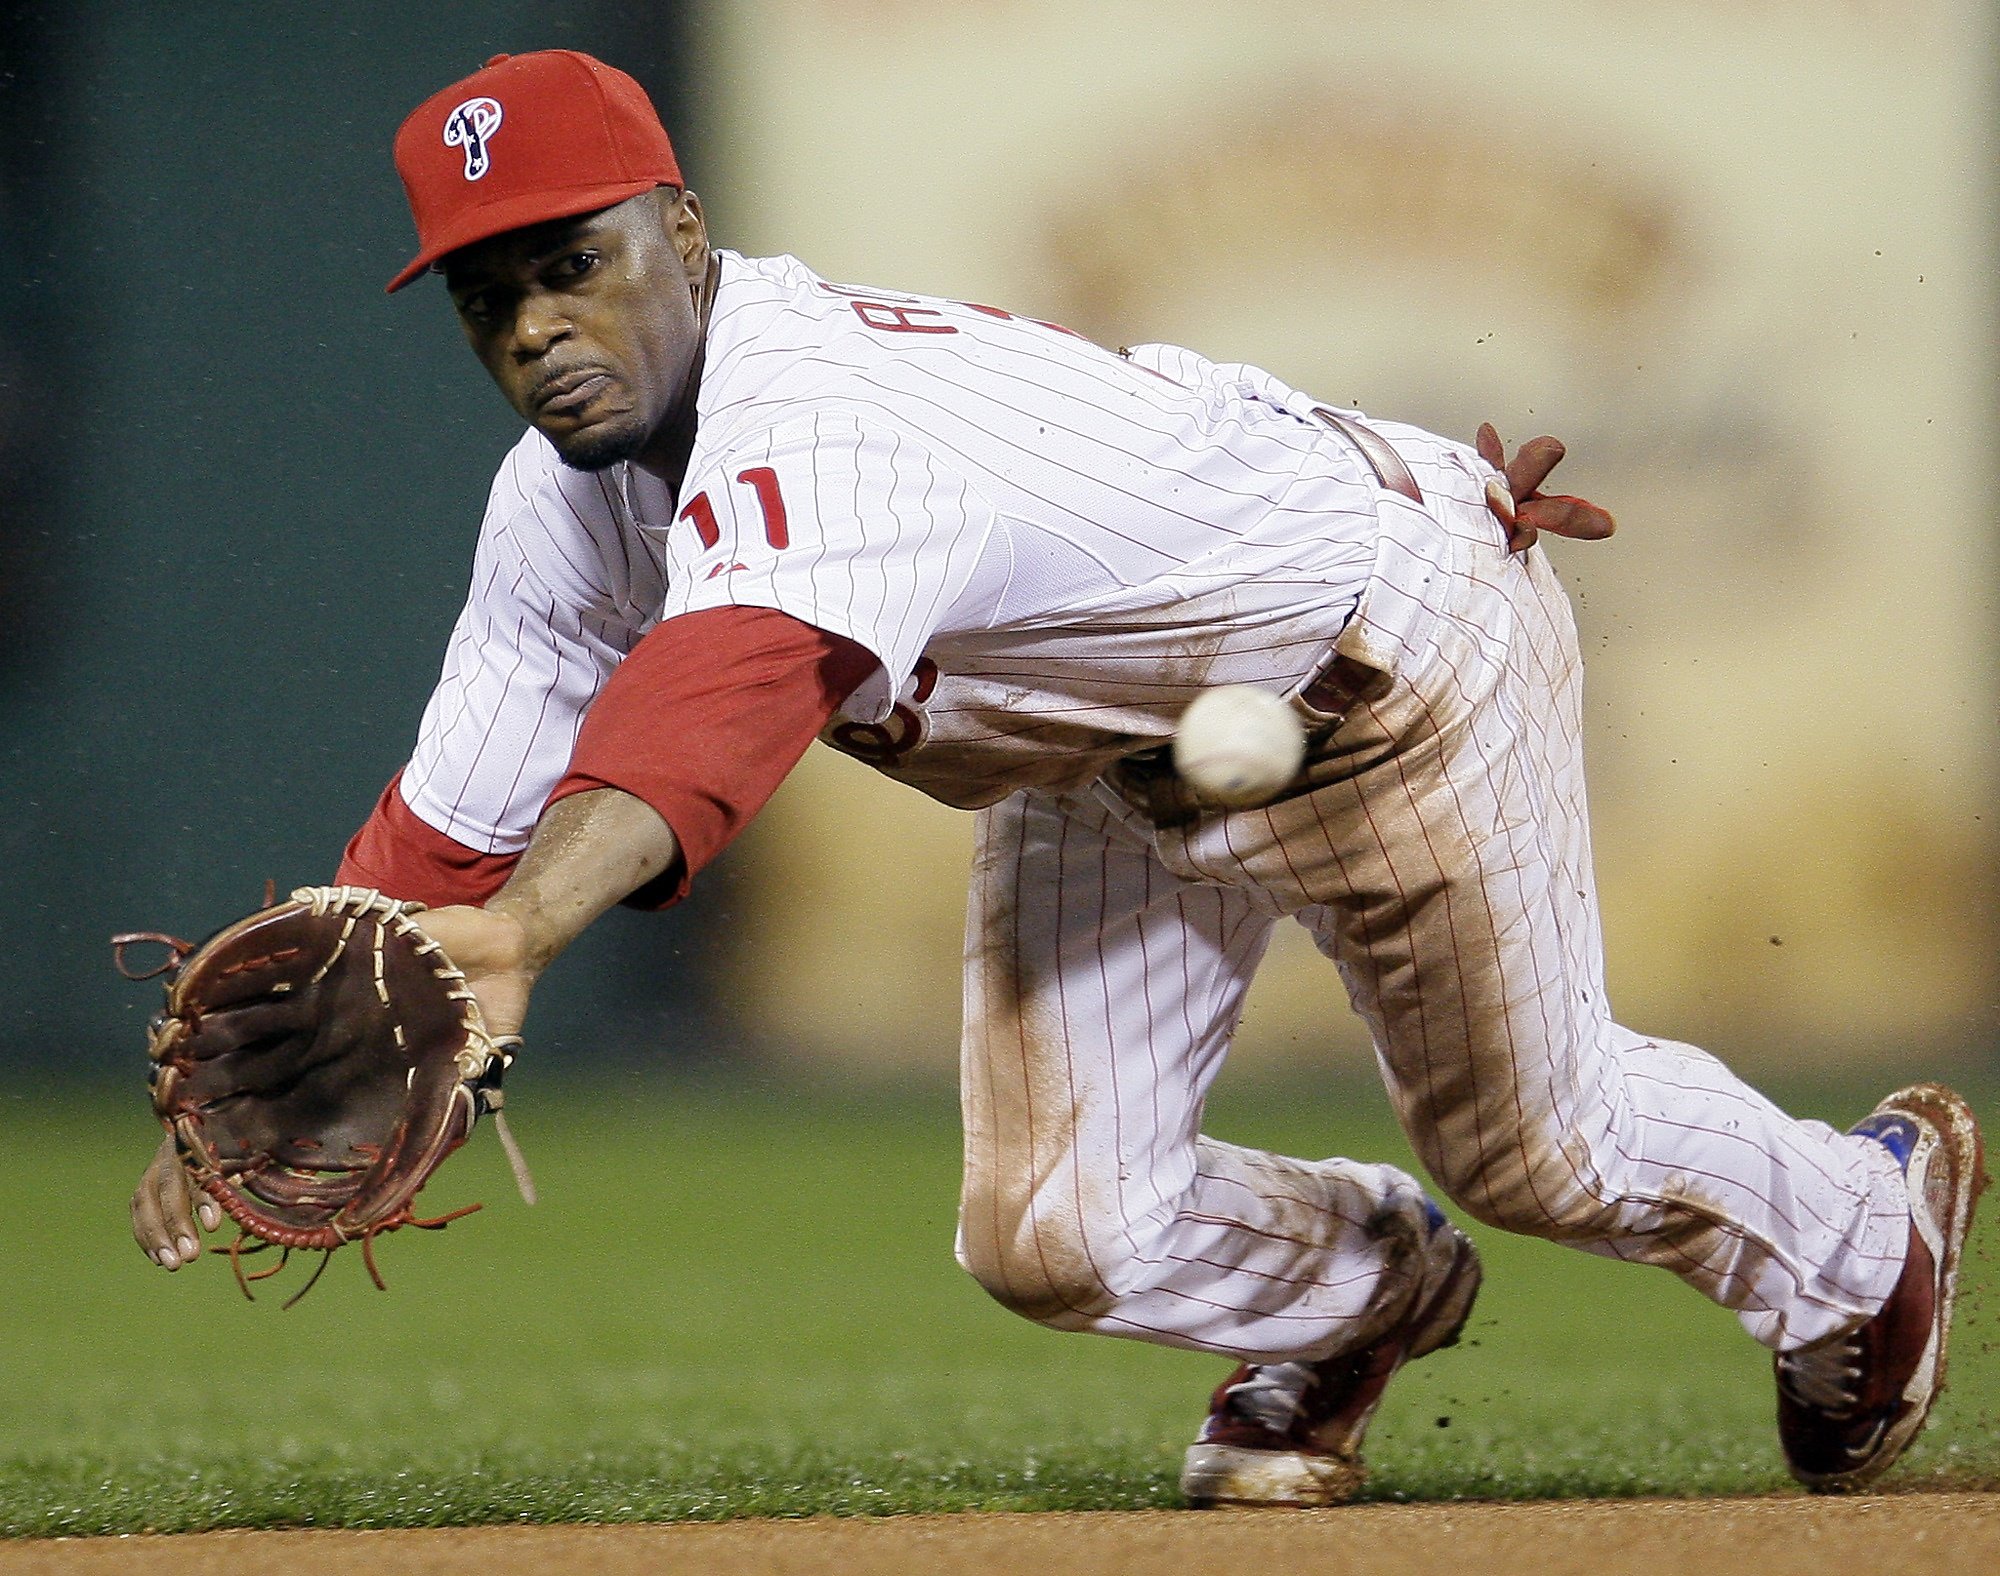 Jimmy Rollins signs minor league deal with the White Sox